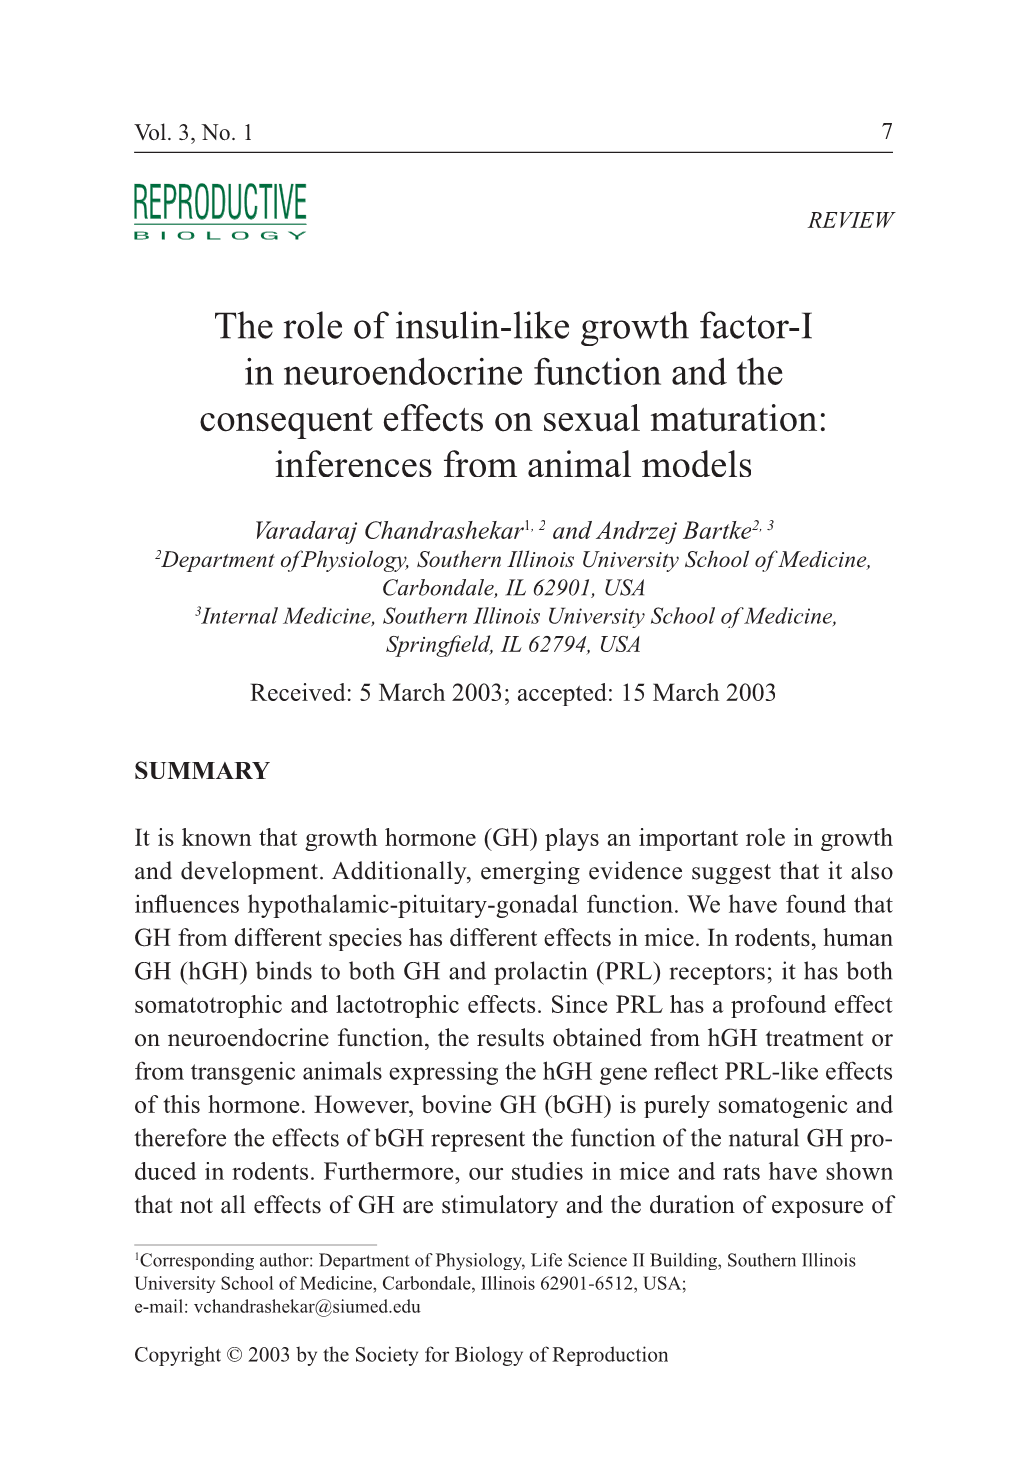 The Role of Insulin-Like Growth Factor-I in Neuroendocrine Function and the Consequent Effects on Sexual Maturation: Inferences from Animal Models